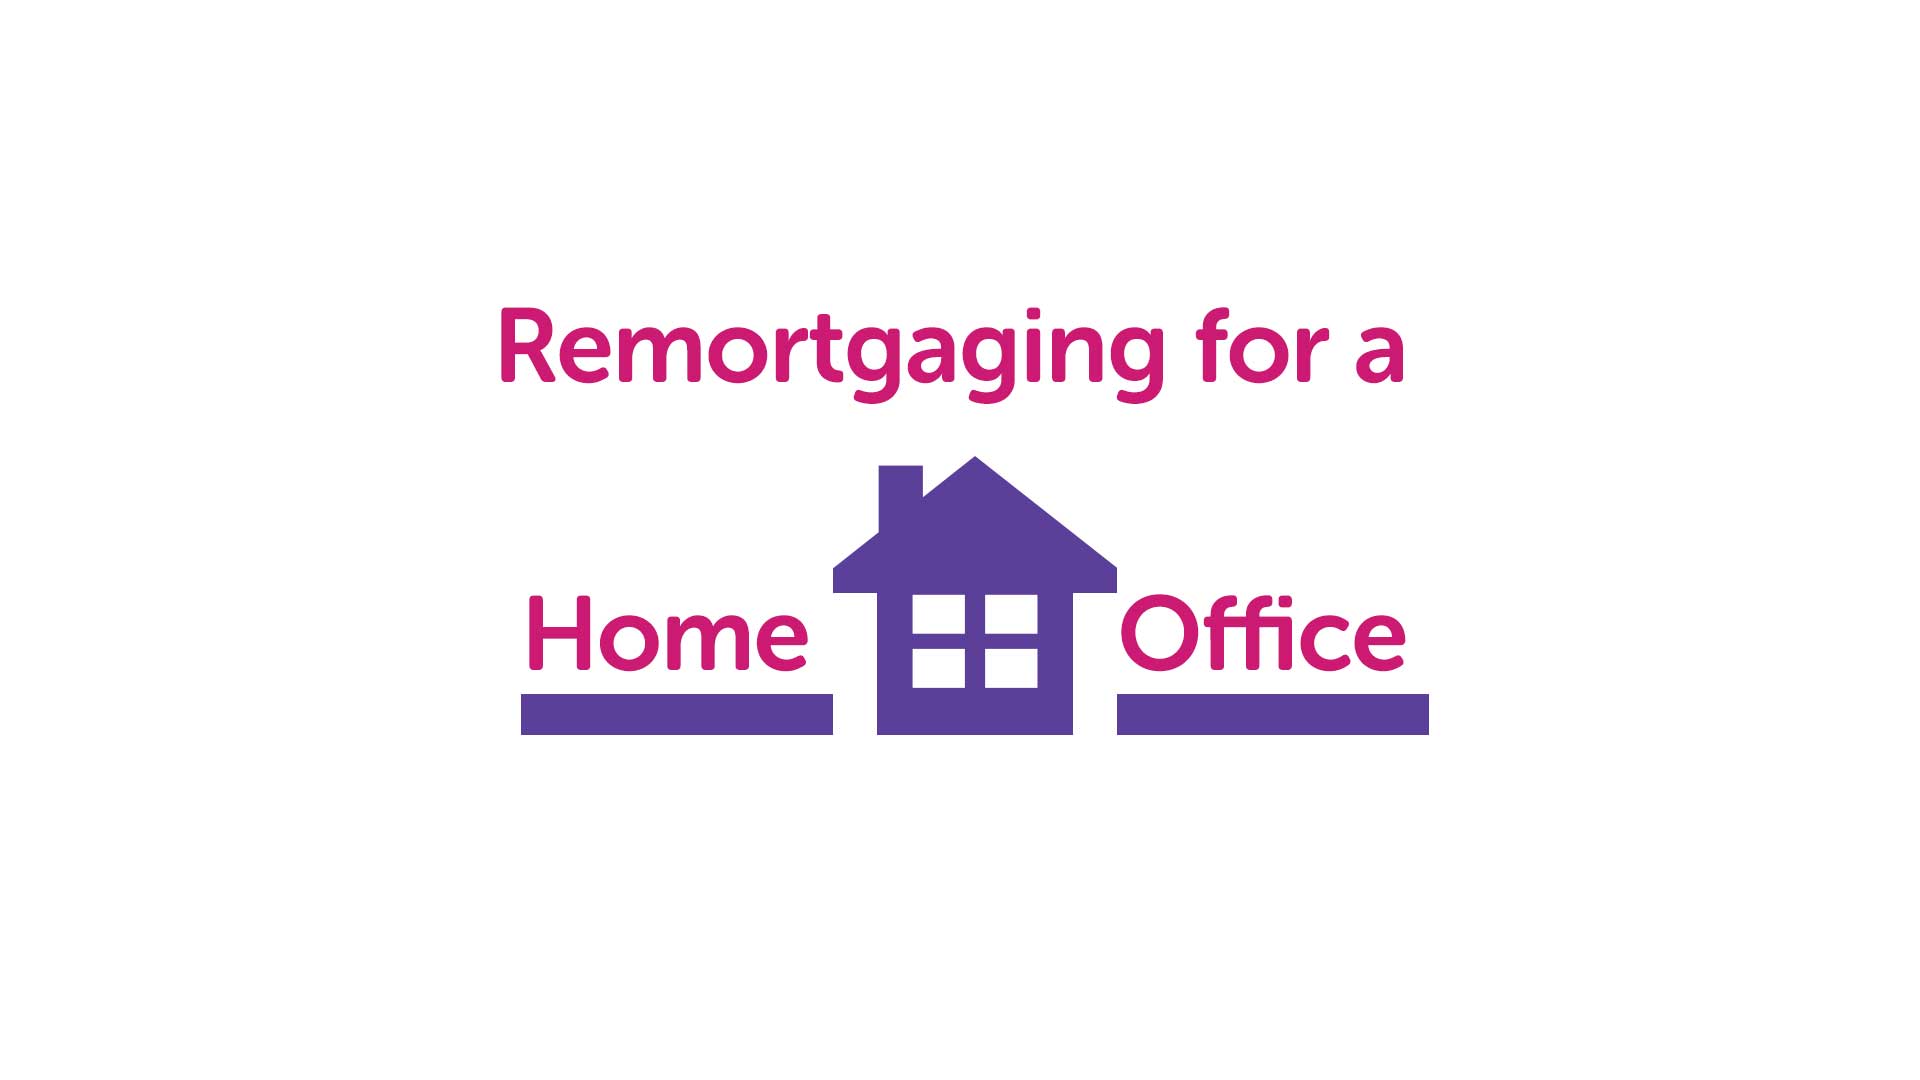 Remortgage for a Home Office | Londonmoneyman